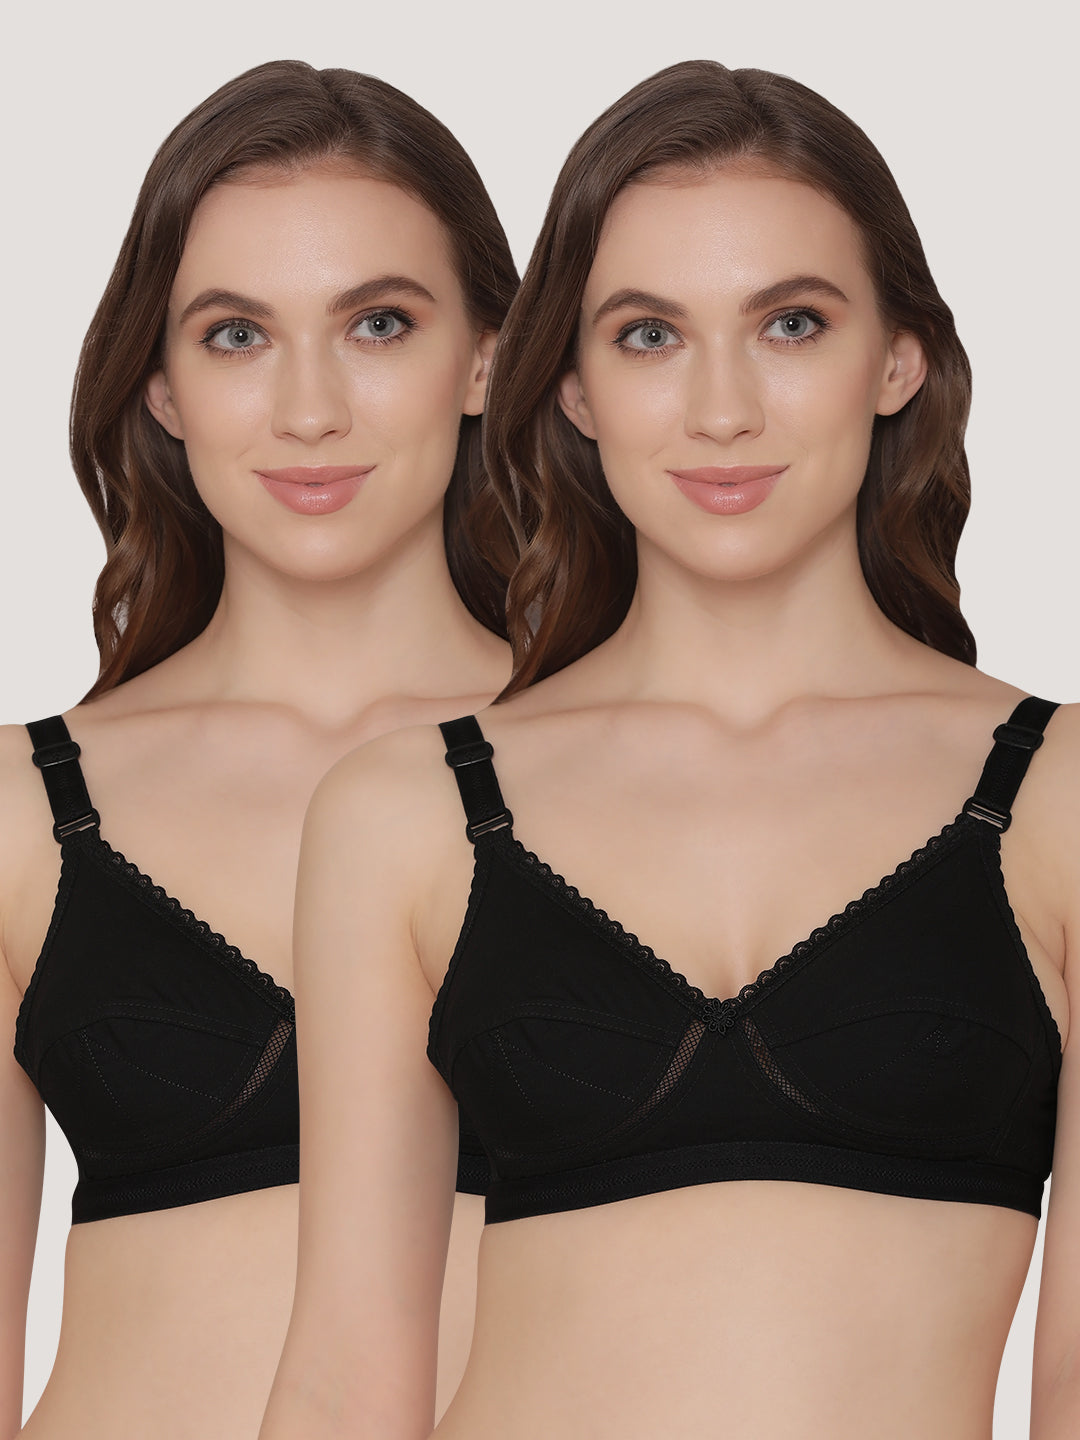 Buy Kalyani Pack of 3 Heavily Padded Cotton Demi Cup Bra - Assorted Online  at Low Prices in India 